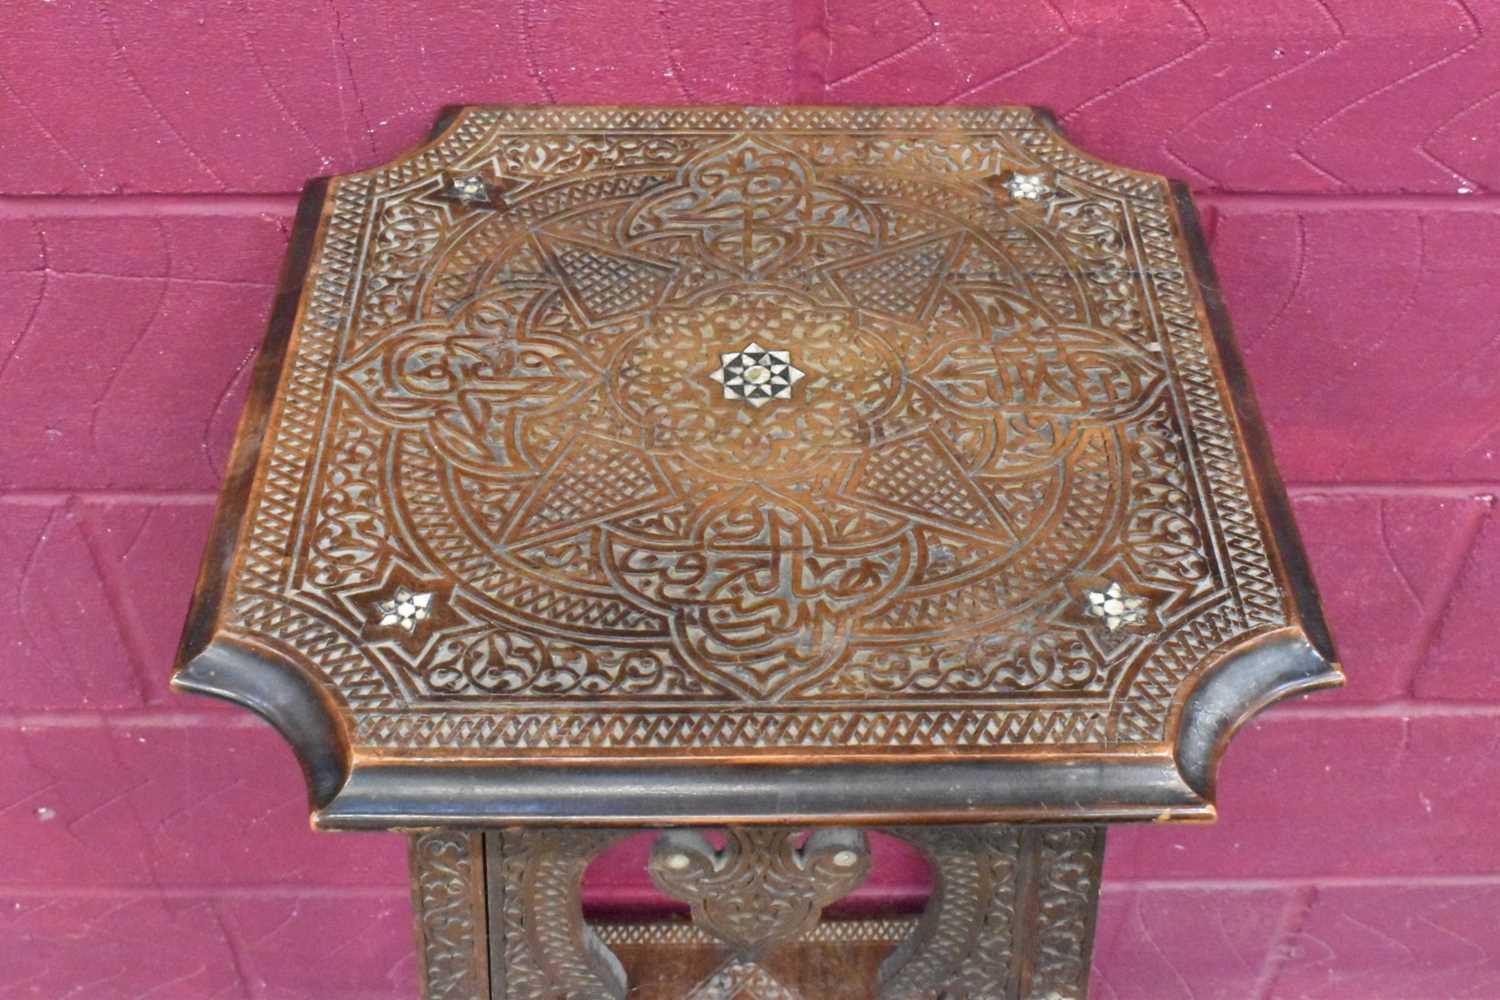 Antique Islamic mother of pearl inlaid plant stand, Syria - Image 2 of 5